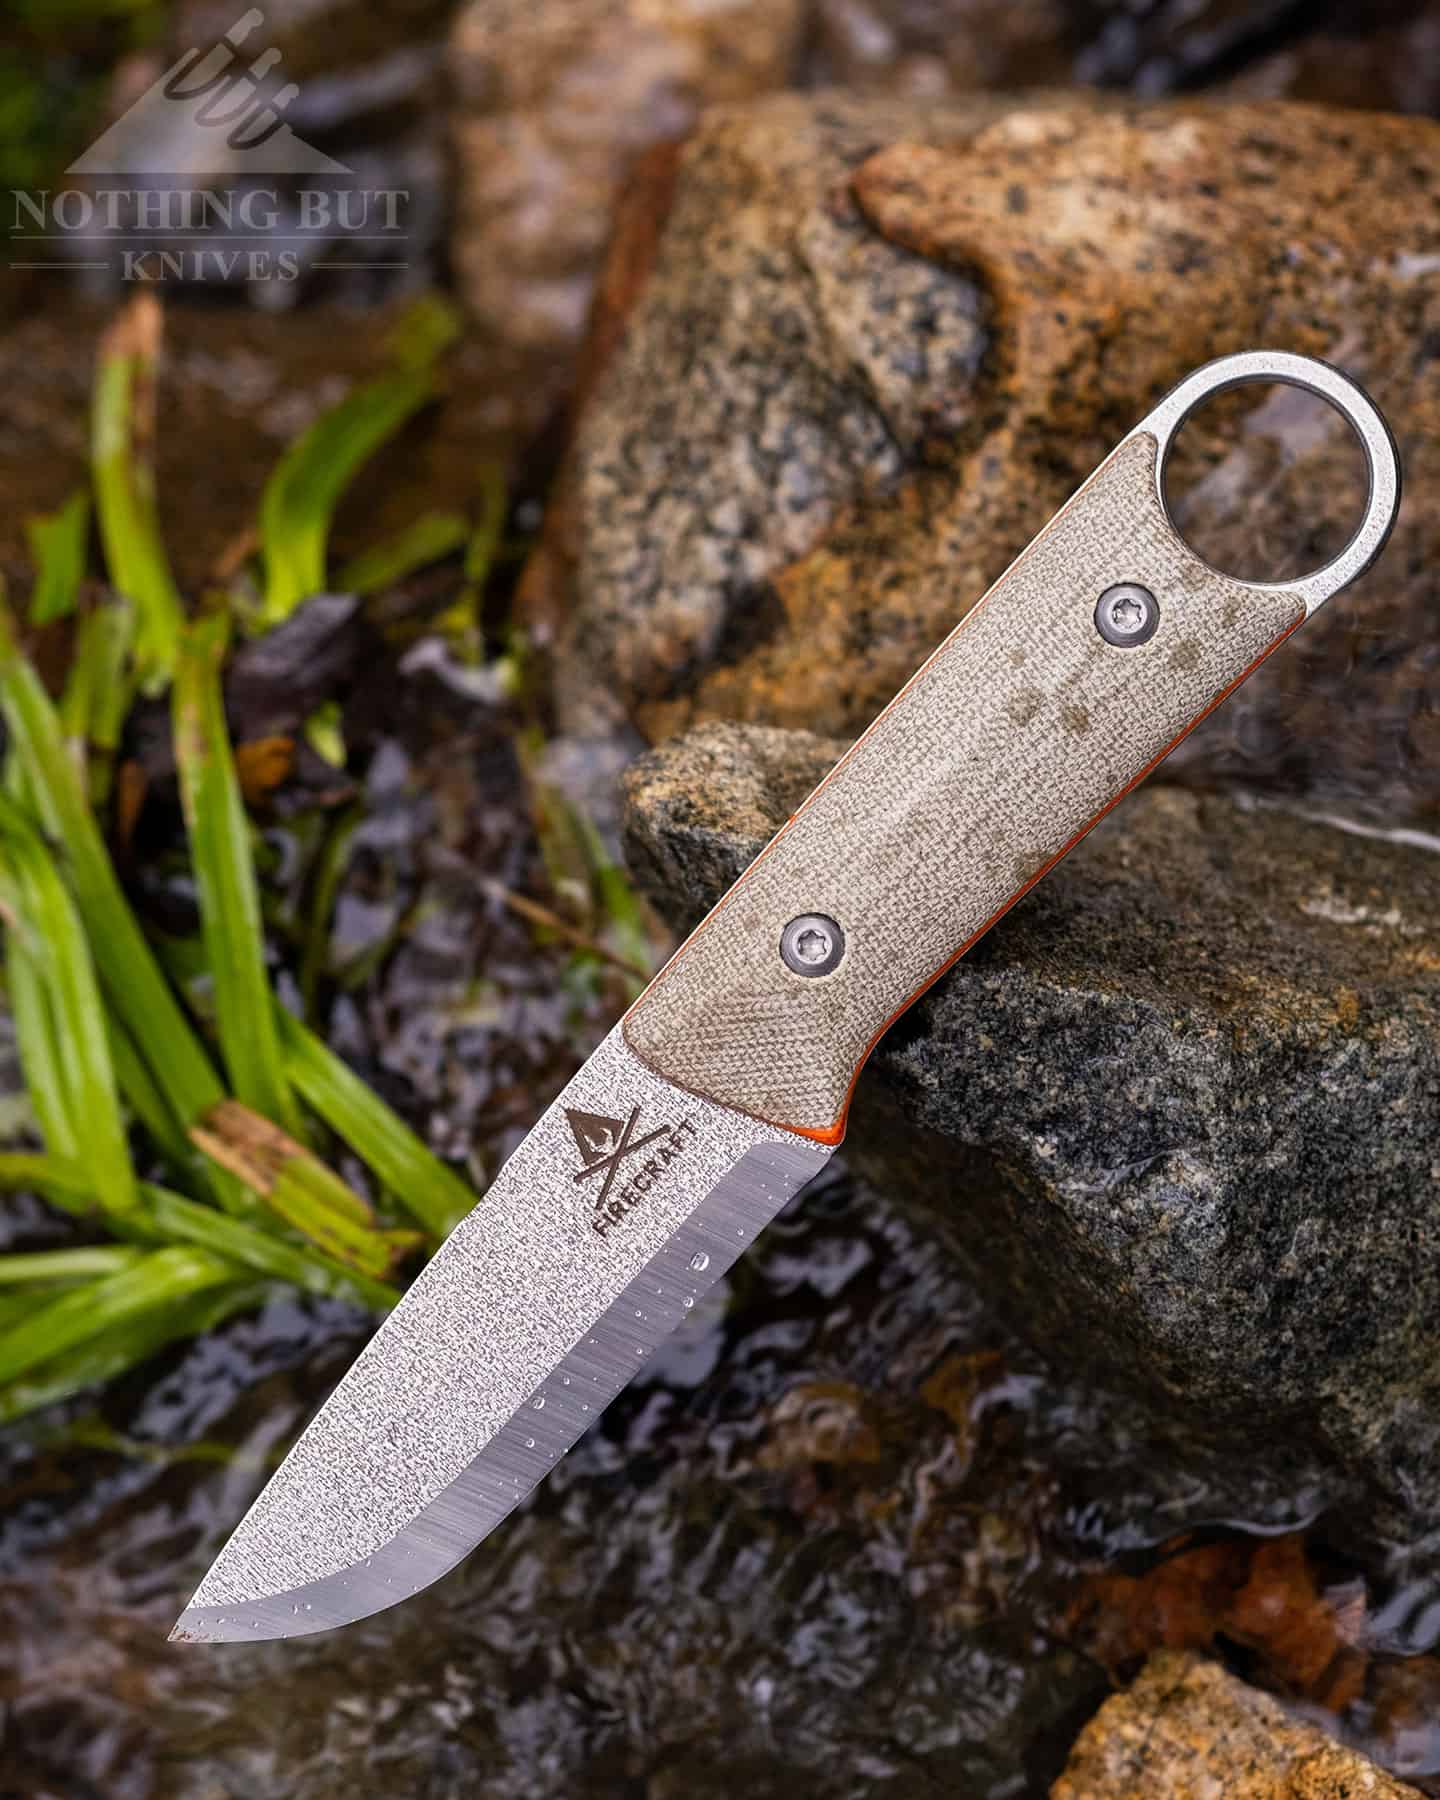 The left side of the White River's handle has a solid slab of orange-lined micarta.